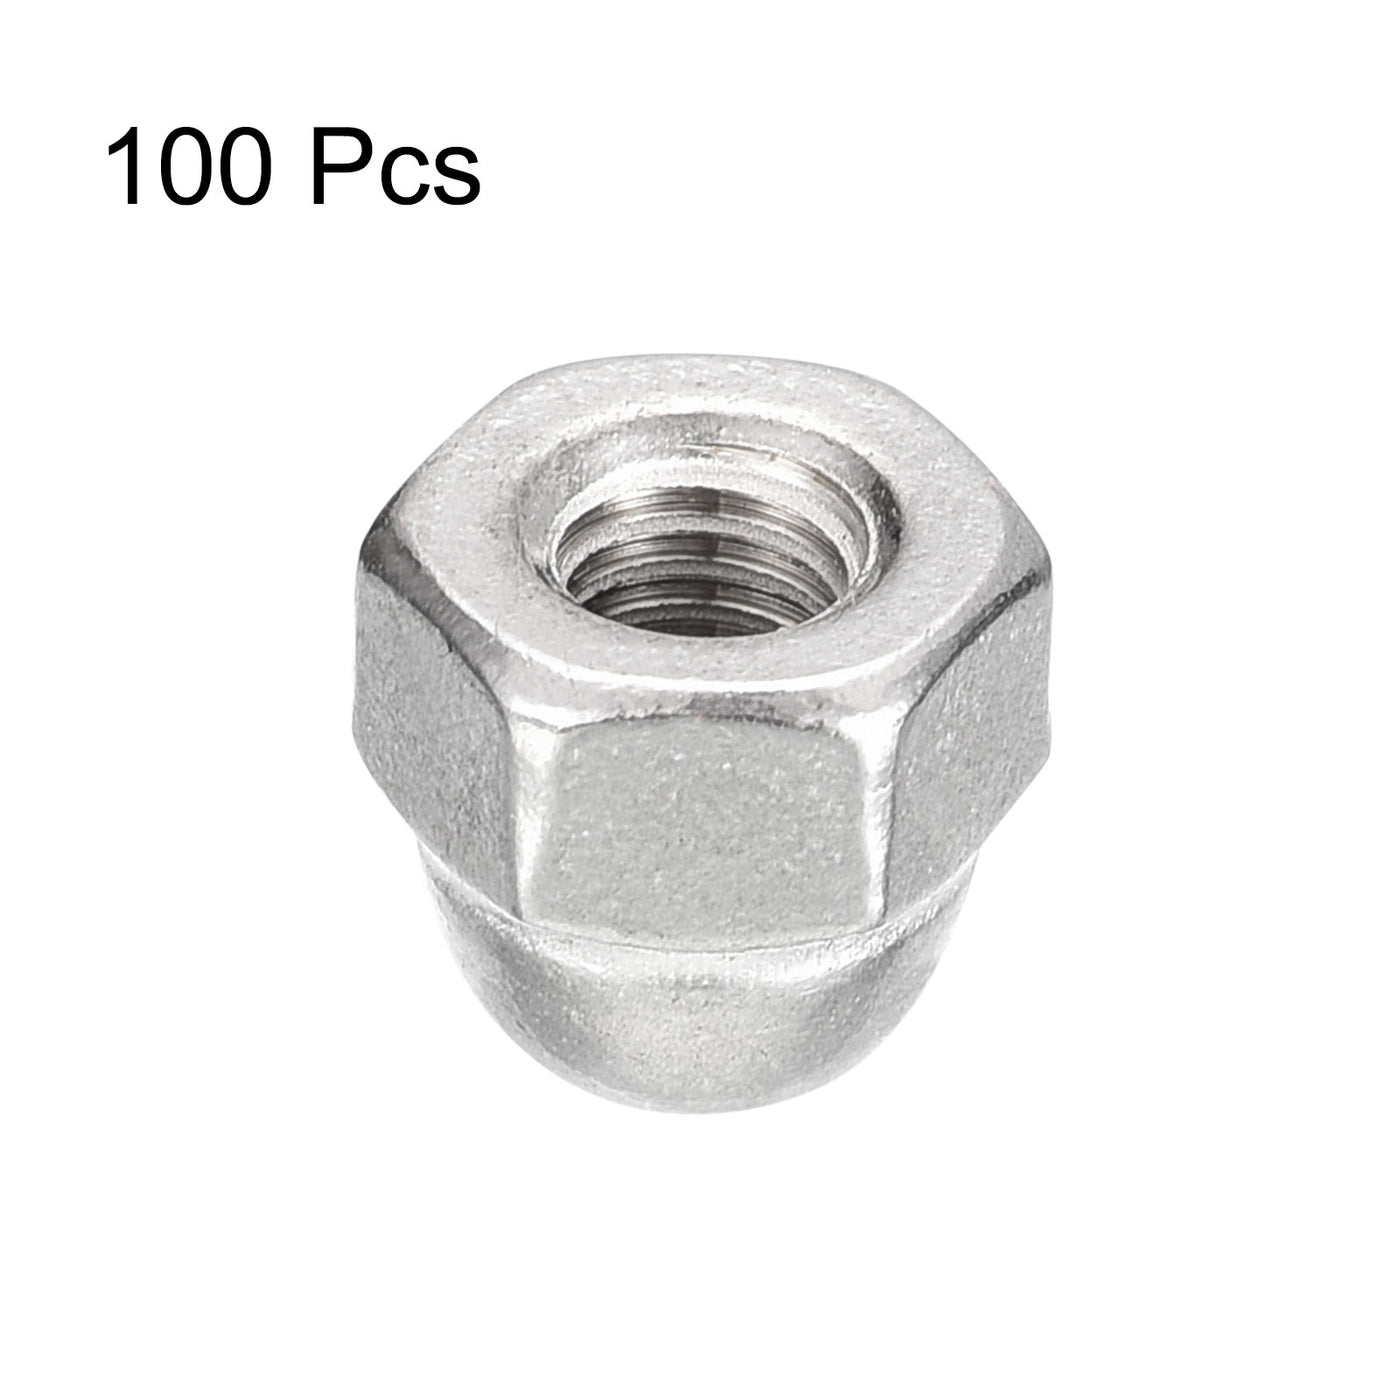 uxcell Uxcell #10-32 Acorn Cap Nuts,100pcs - 304 Stainless Steel Hardware Nuts, Acorn Hex Cap Dome Head Nuts for Fasteners (Silver)